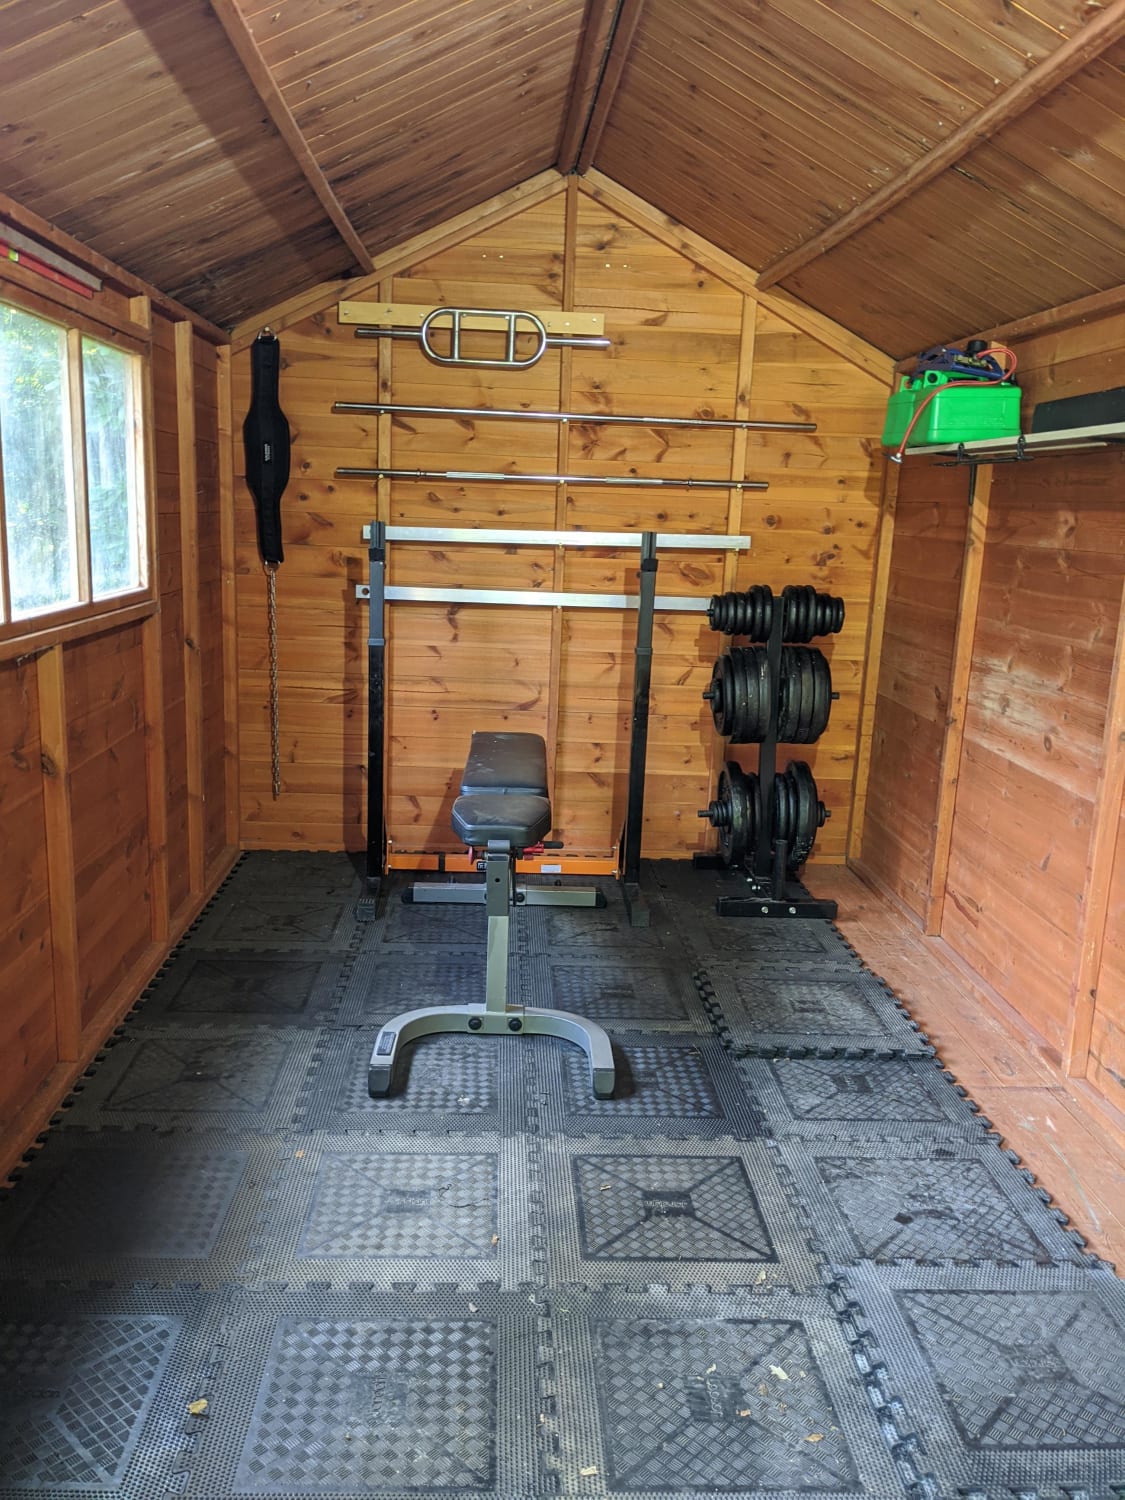 Turned my shed into a a small weight room.